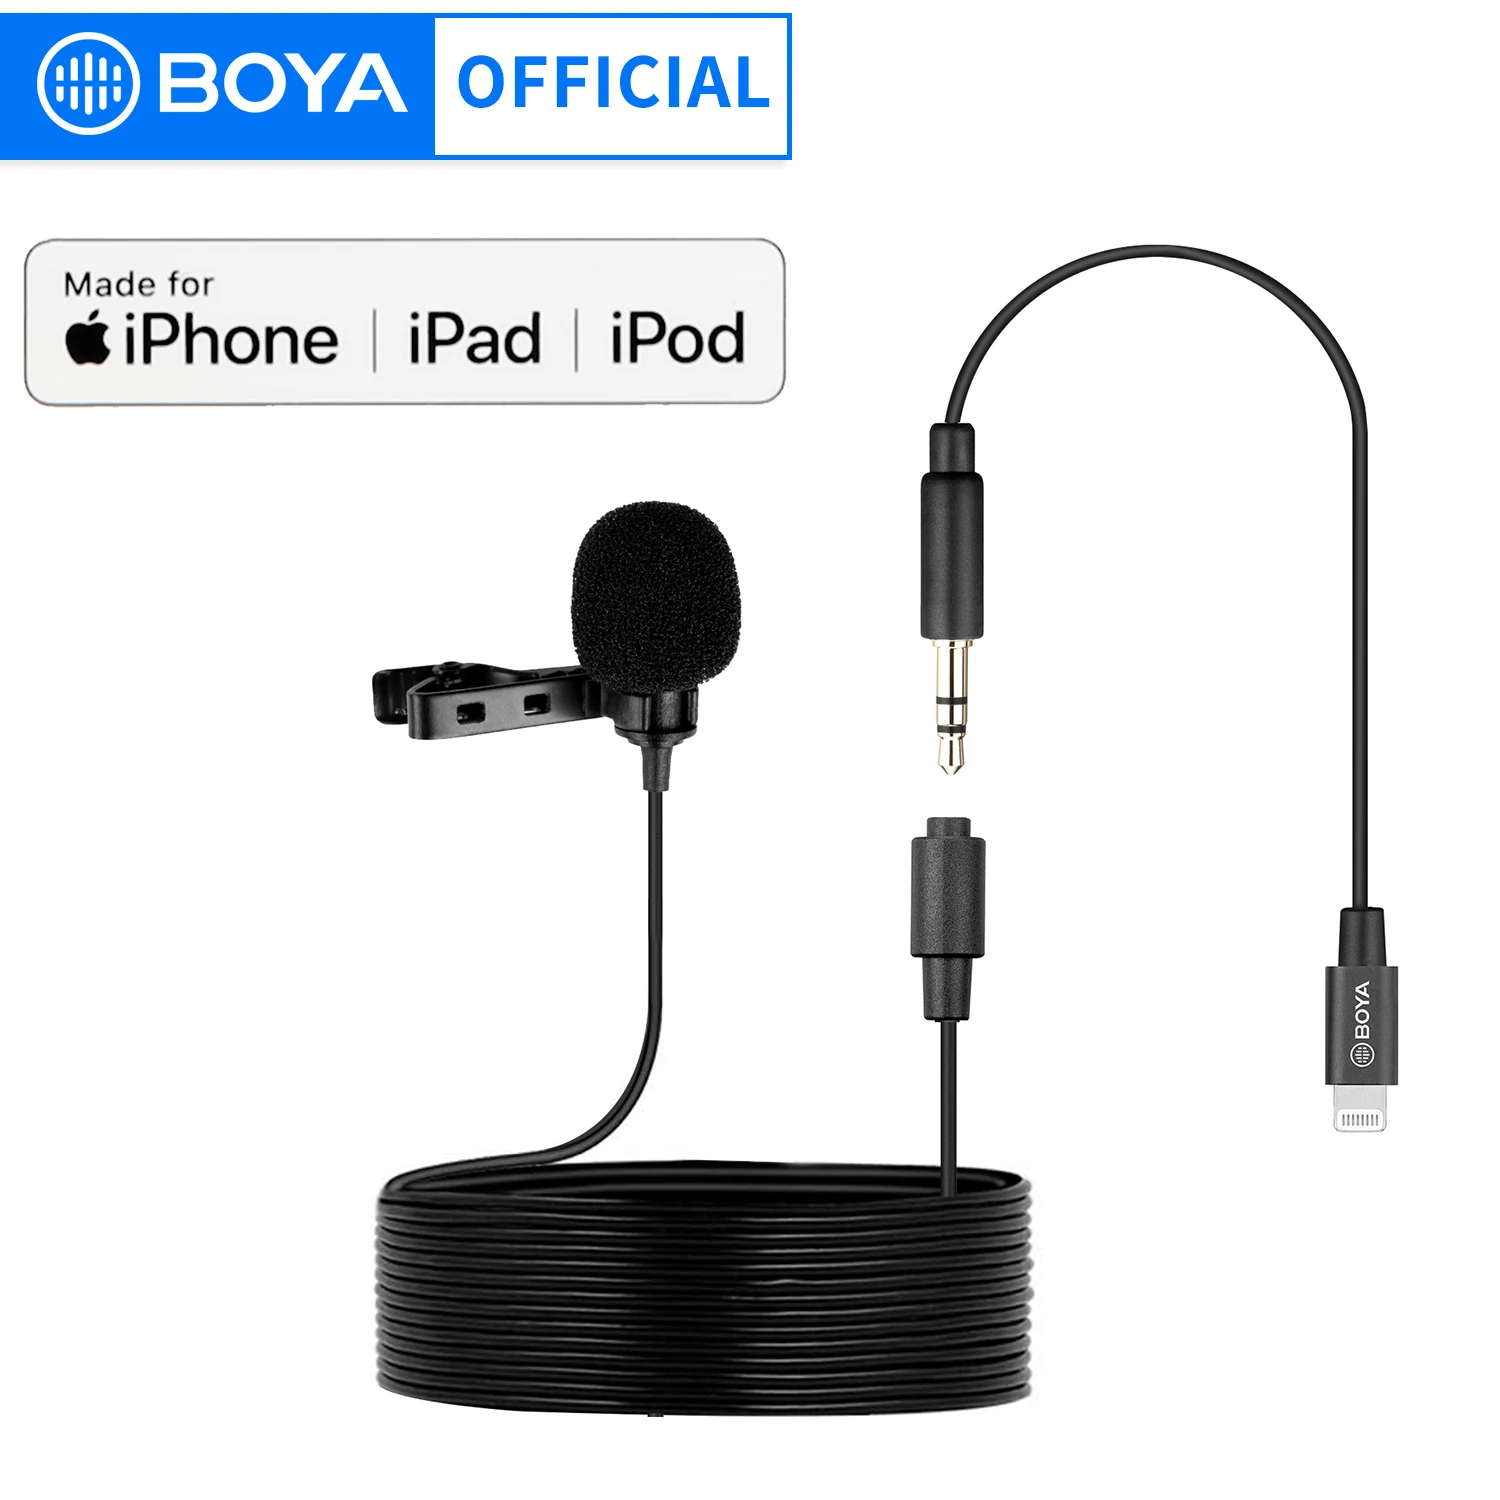 BOYA BY-M2 Lavalier Lapel Clip-on Microphone Cardioid Mic with 3.5mm TRS Cable Detachable Single Head Compatible for Smartphone